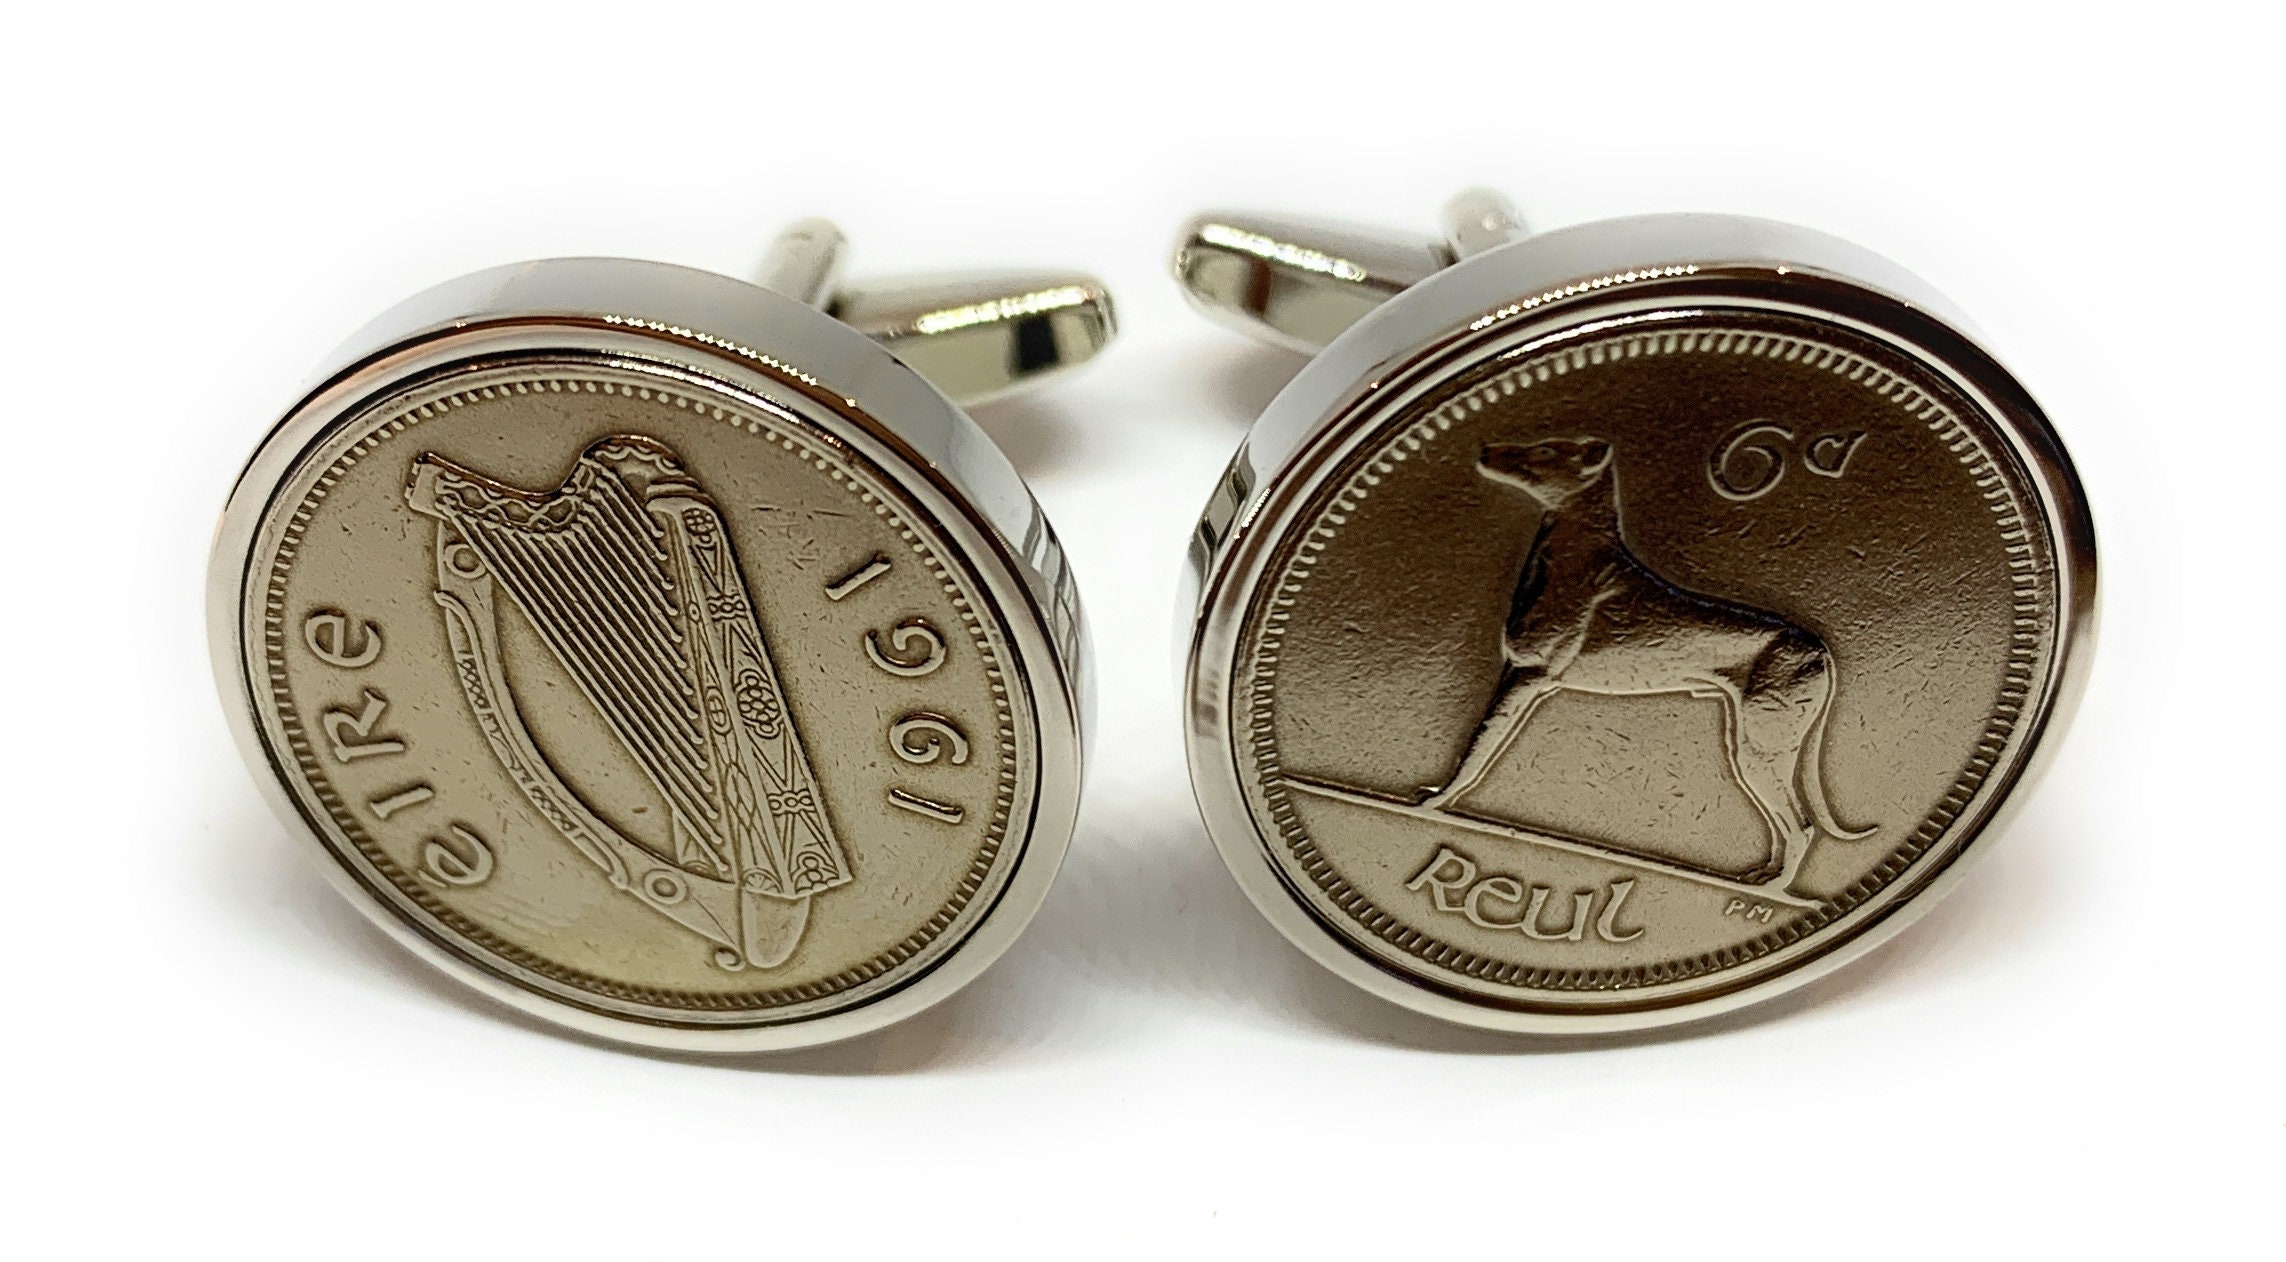 Premium 1950 Original Lucky Sixpence 6d birthday/Anniversary Cufflinks ideal for a 70th birthday